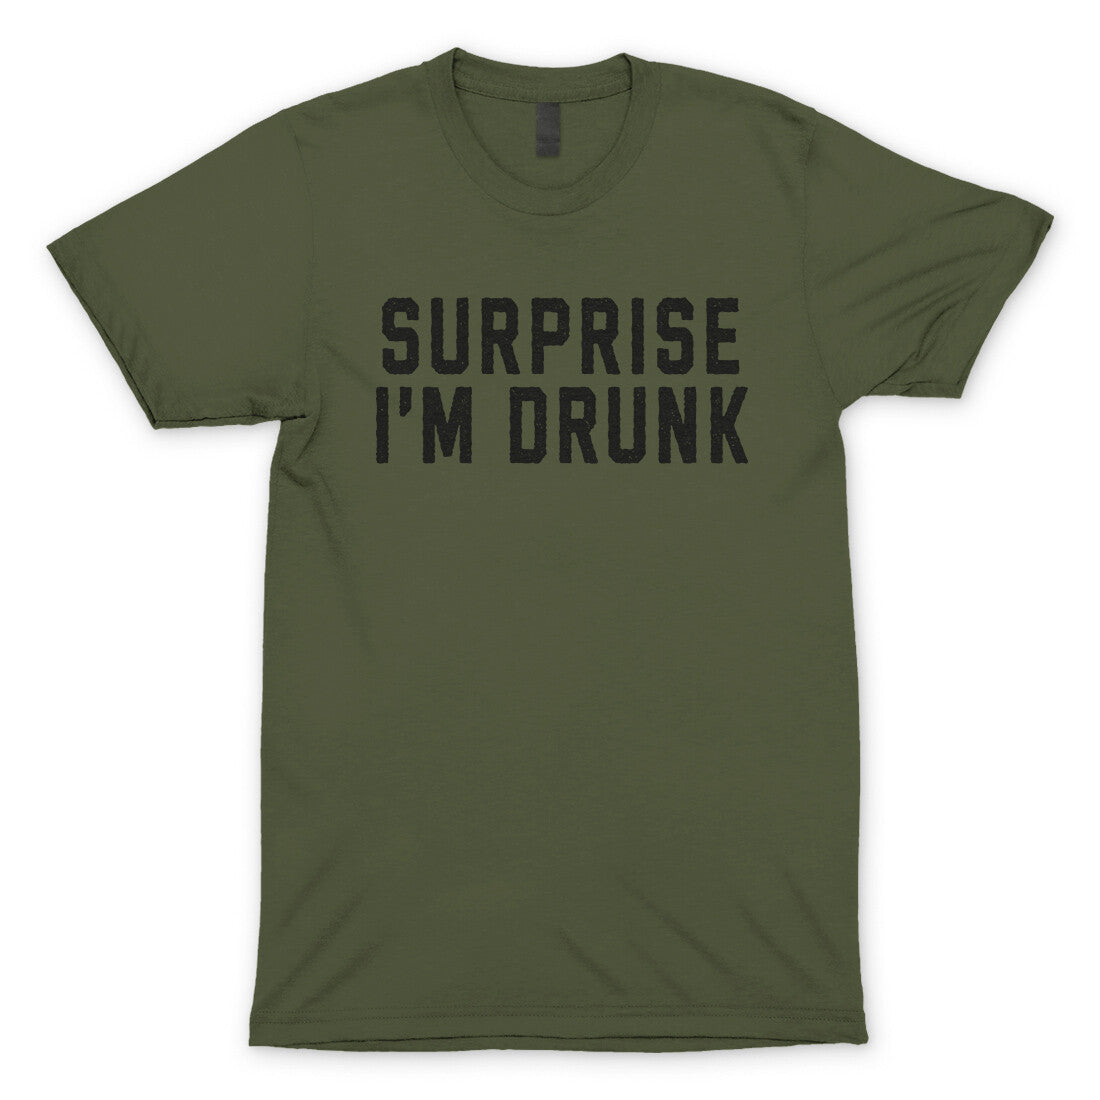 Surprise I'm Drunk in Military Green Color